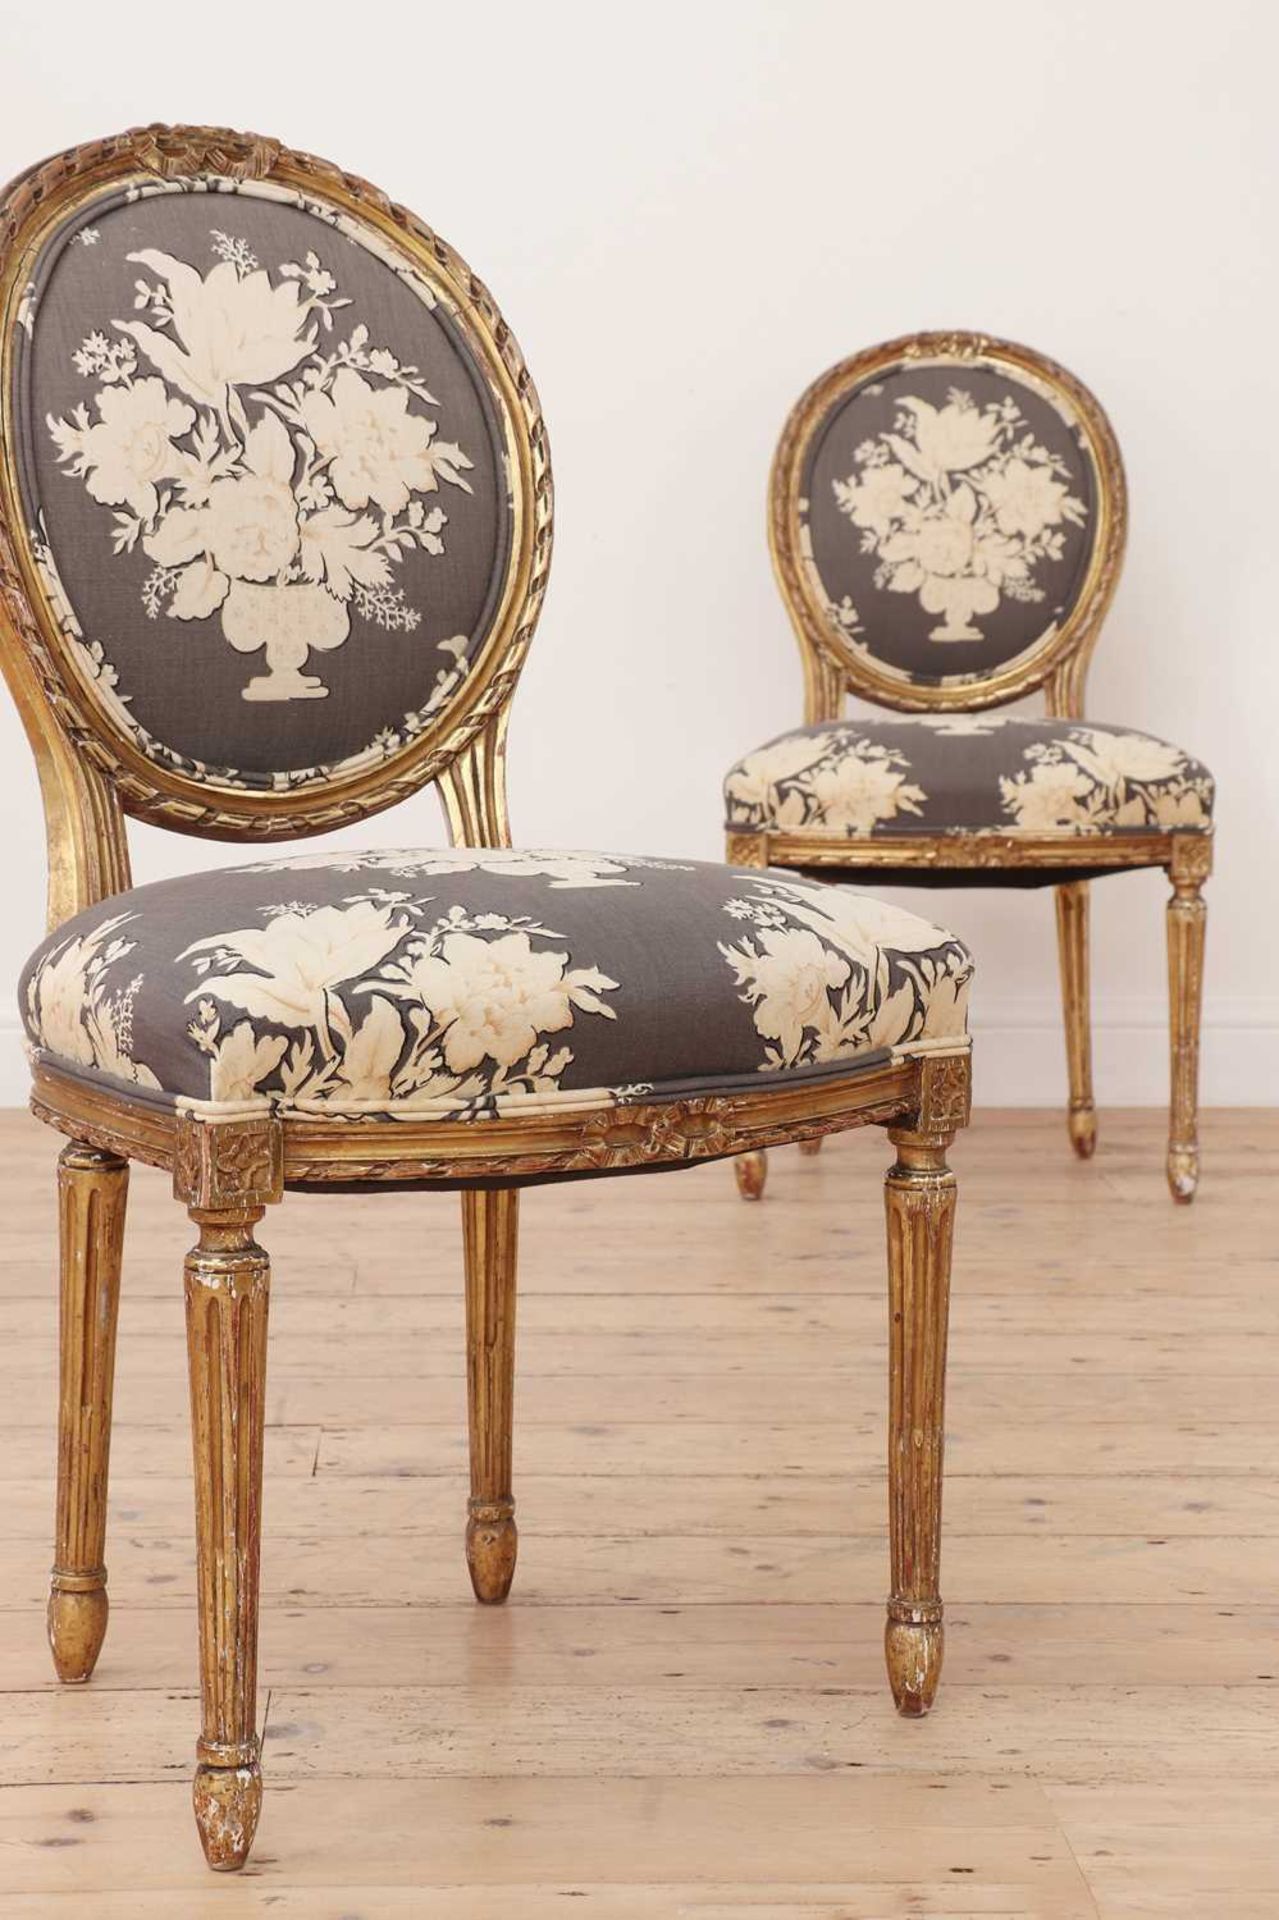 A pair of Louis XVI-style giltwood fauteuils, - Image 3 of 4